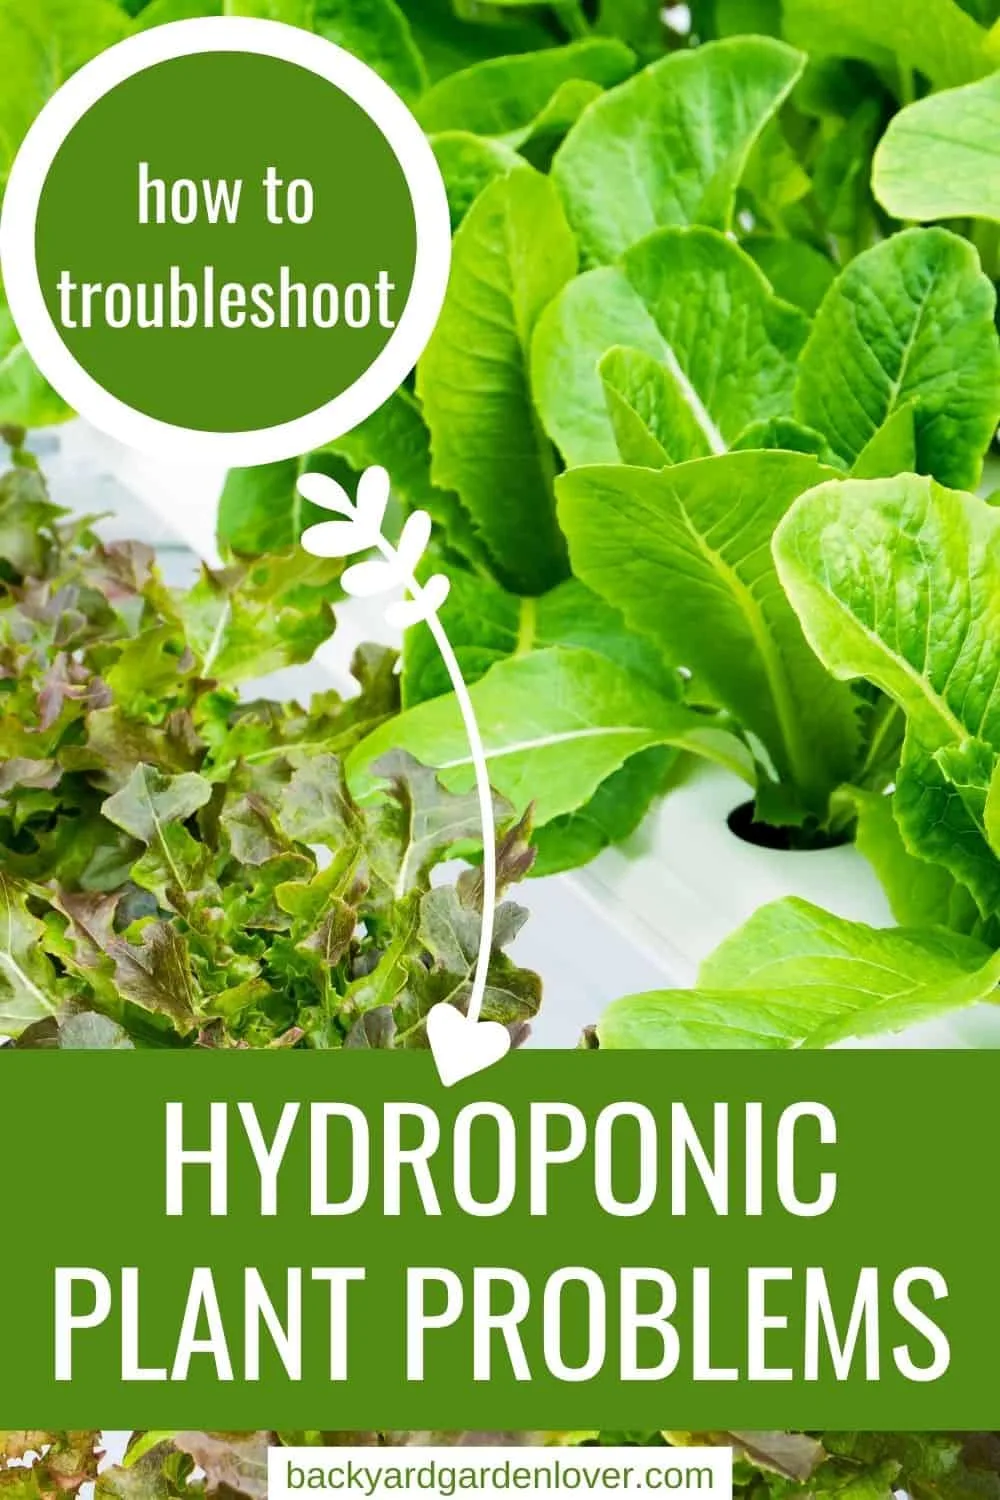 How to troubleshoot hydroponic plant problems - Pinterest image